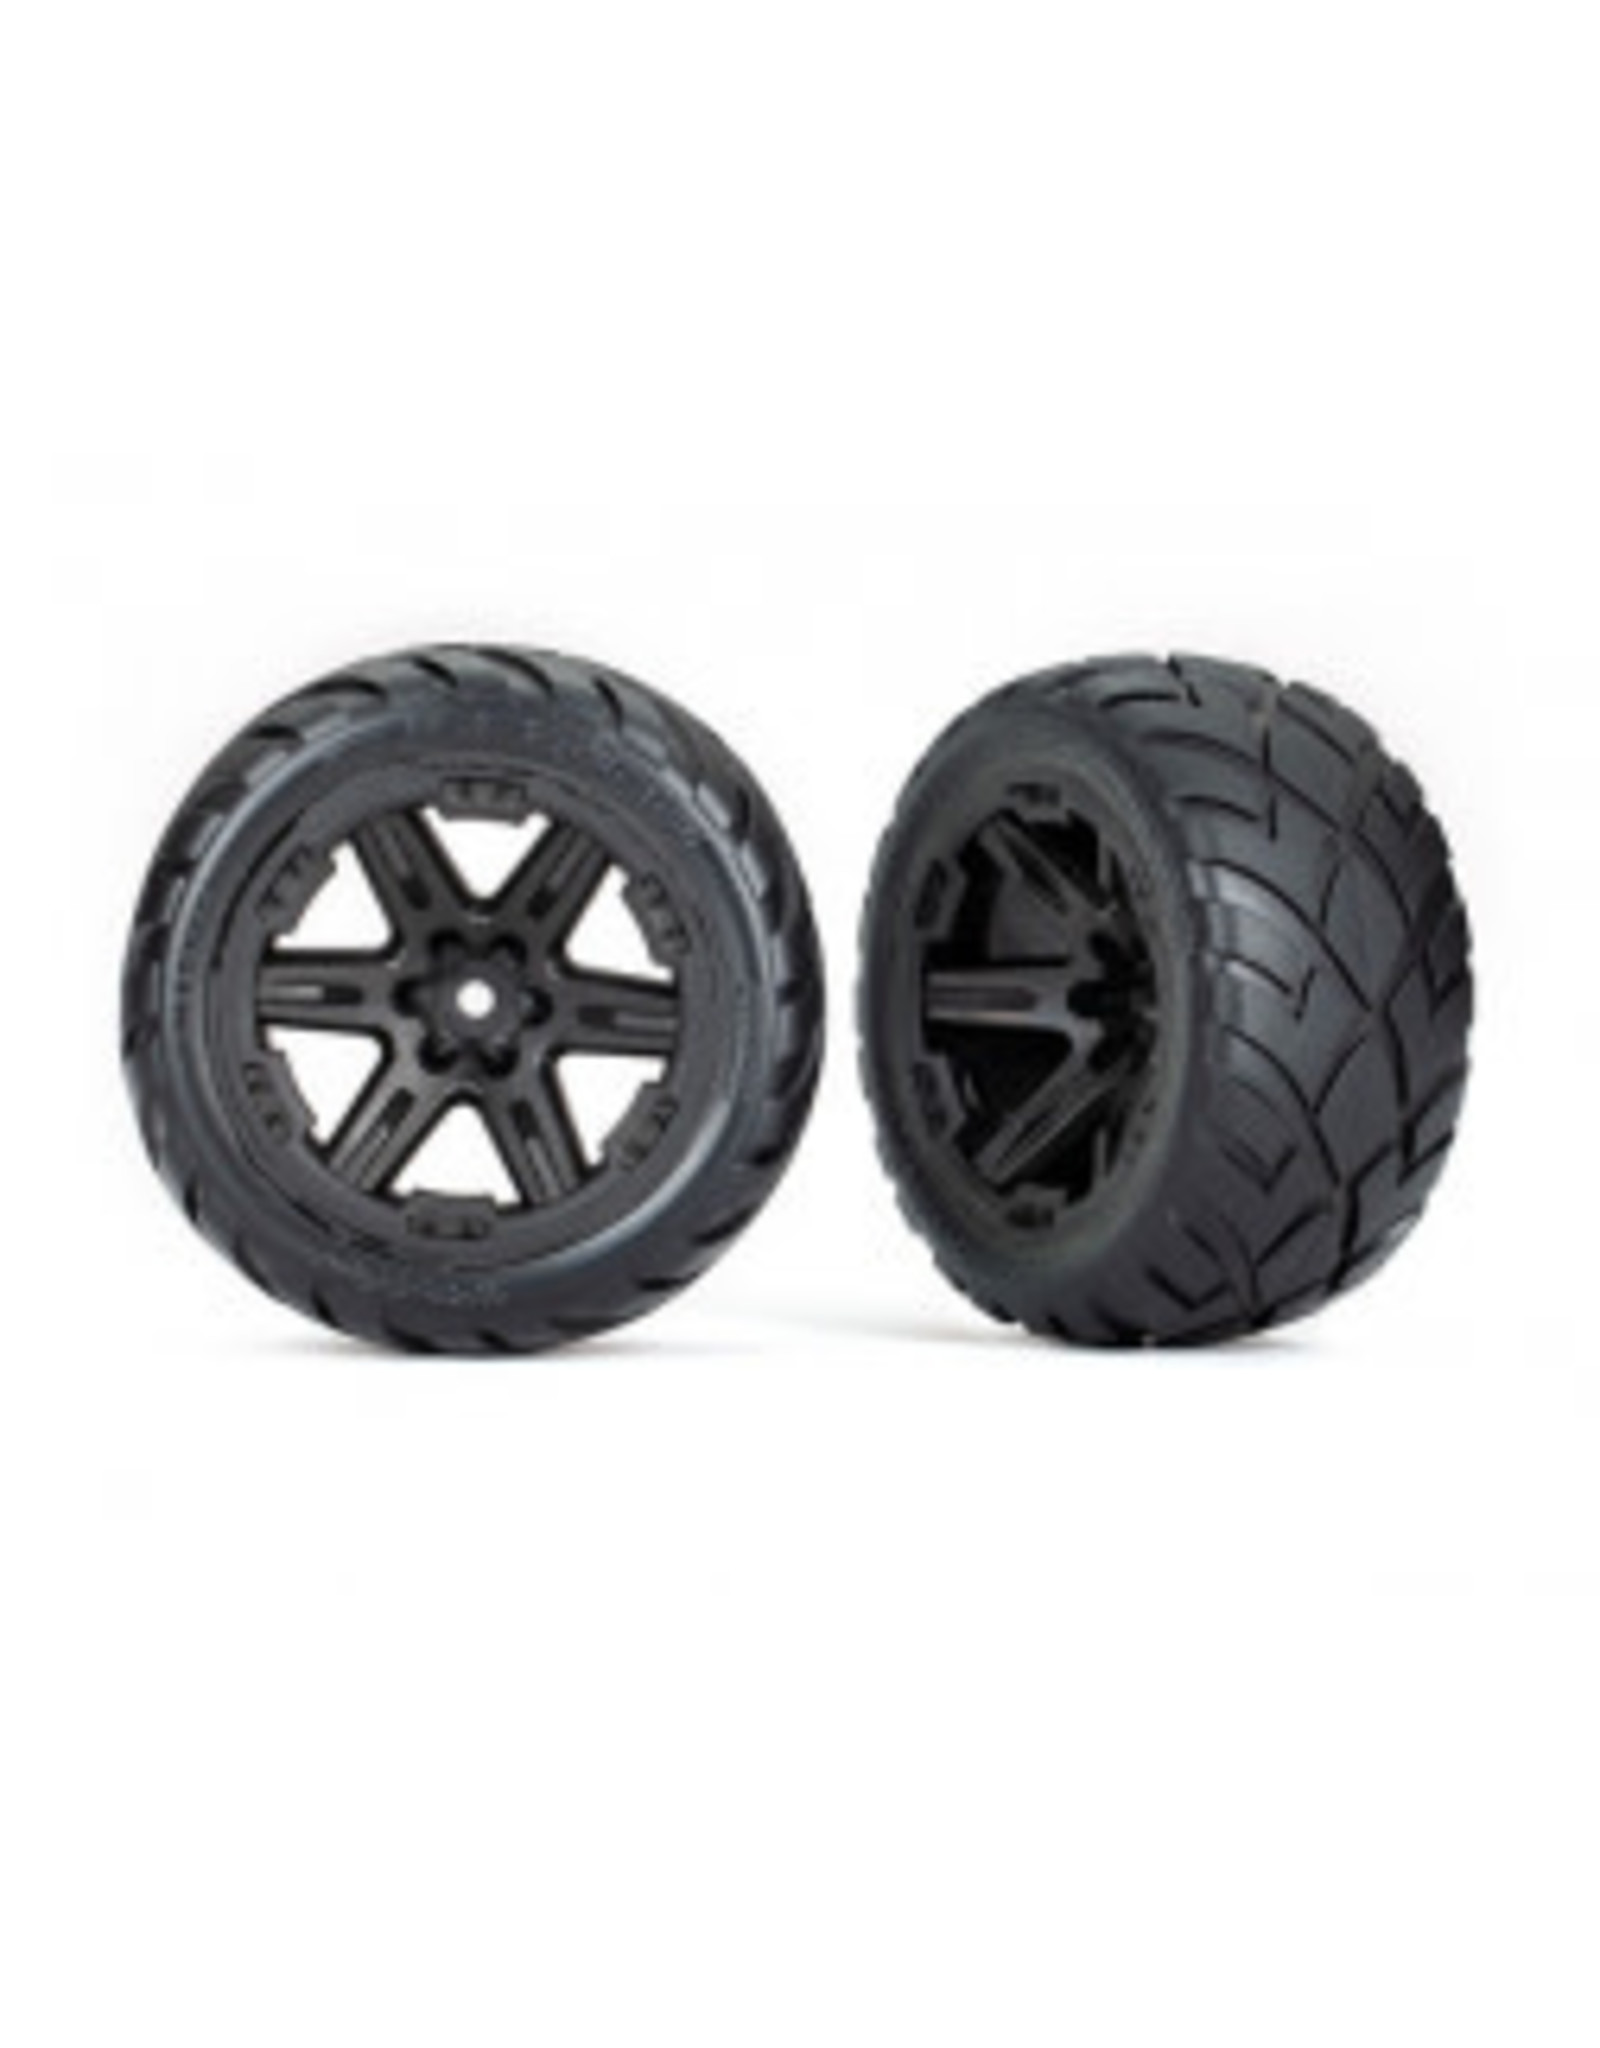 Traxxas Tires & wheels, assembled, glued (2.8") (RXT black wheels, Anaconda tires, foam inserts) (4WD electric front/rear, 2WD electric front only) (2) (TSM rated)